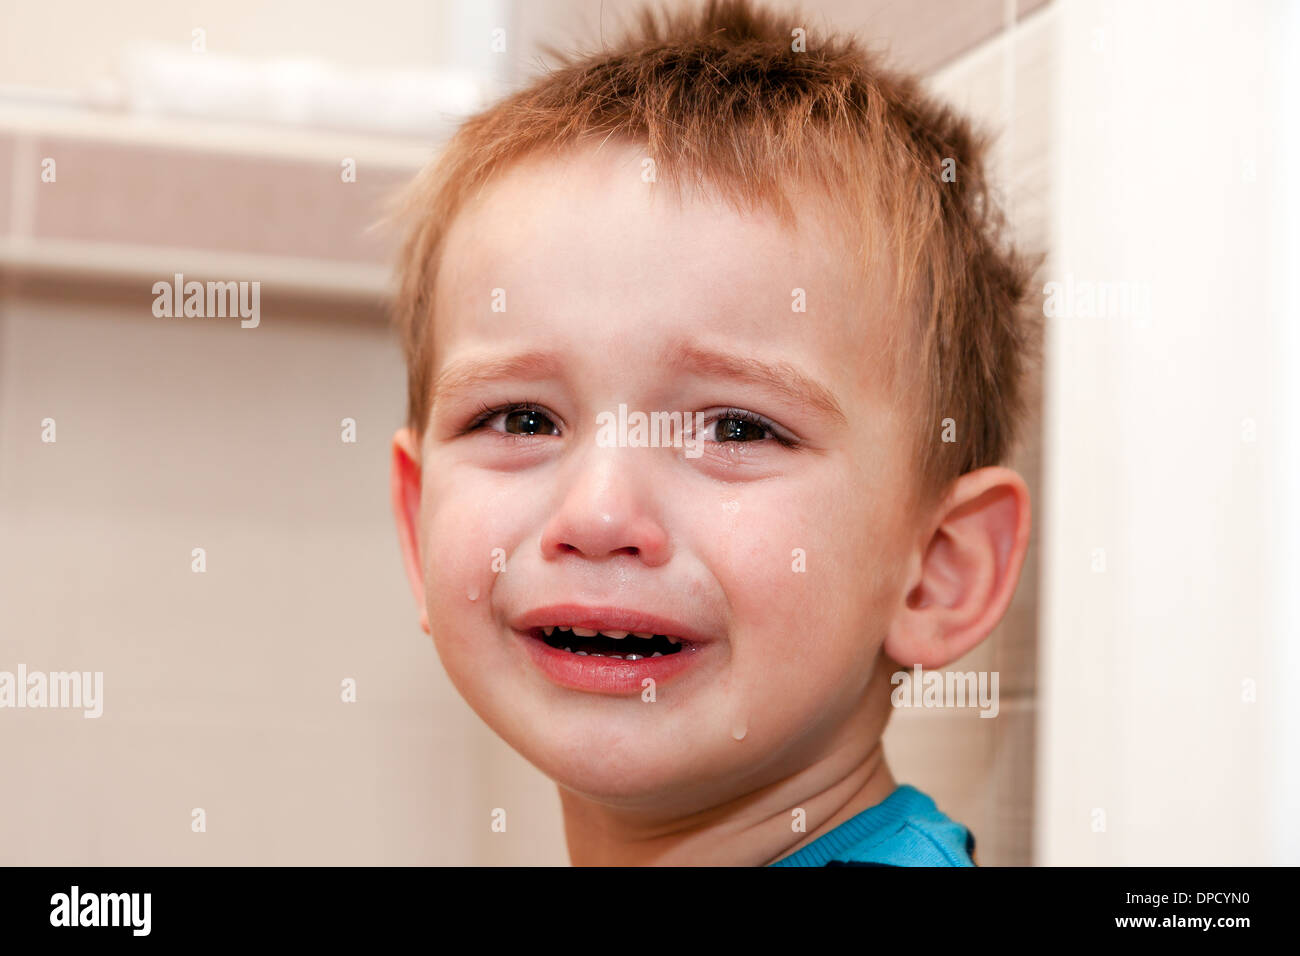 Portrait Of Crying Baby Boy In Home Stock Photo - Alamy